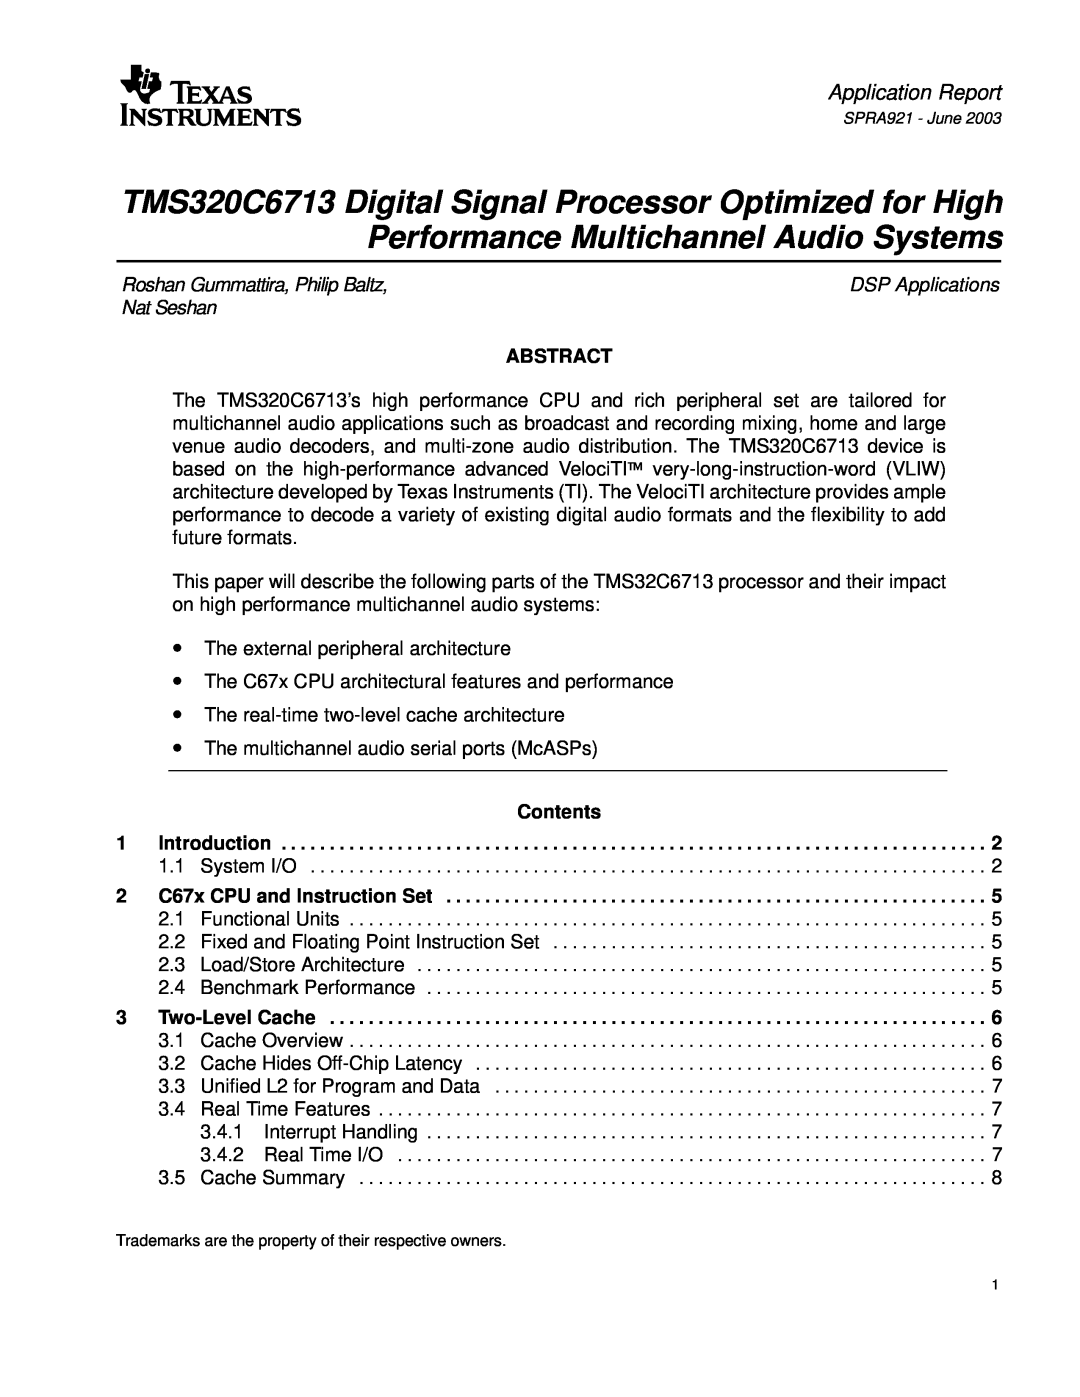 Philips TMS320C6713 manual Abstract, Contents 1 Introduction, Application Report 